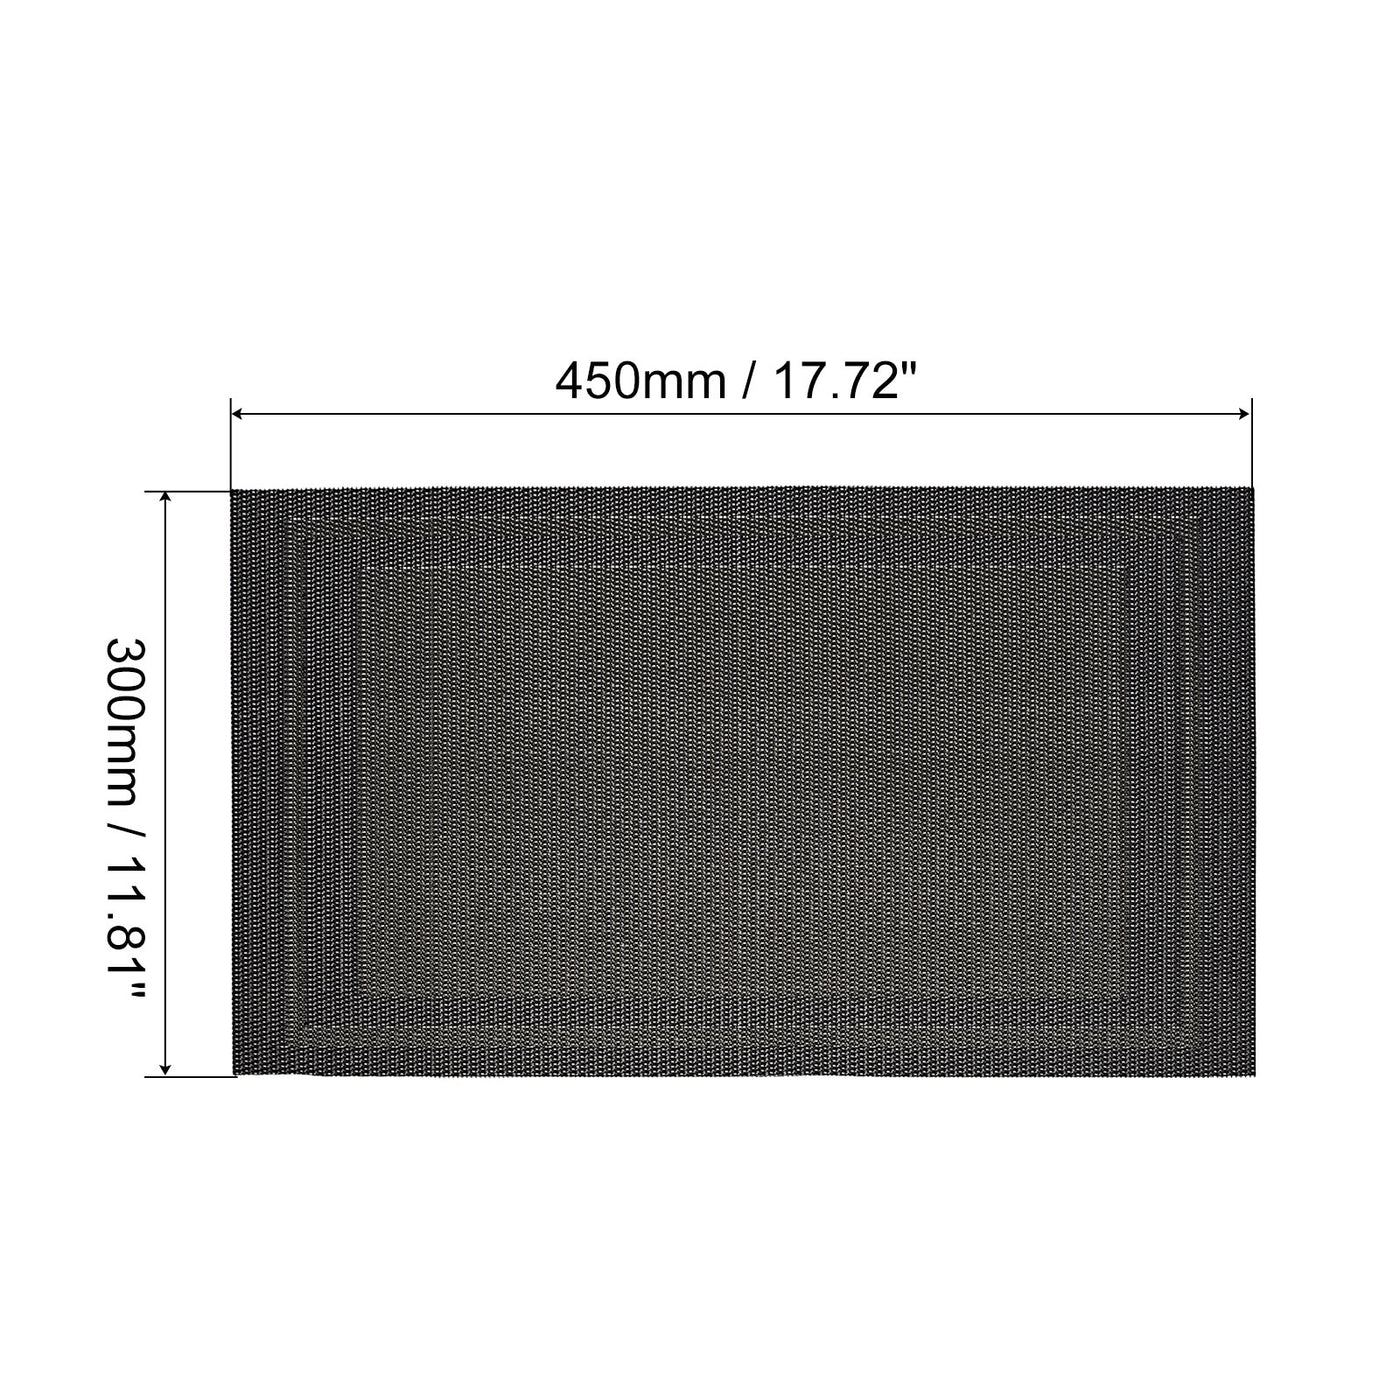 uxcell Uxcell Place Mats, 450x300mm Table Mats Set of 8 PVC Washable Woven Placemat Dark Gray